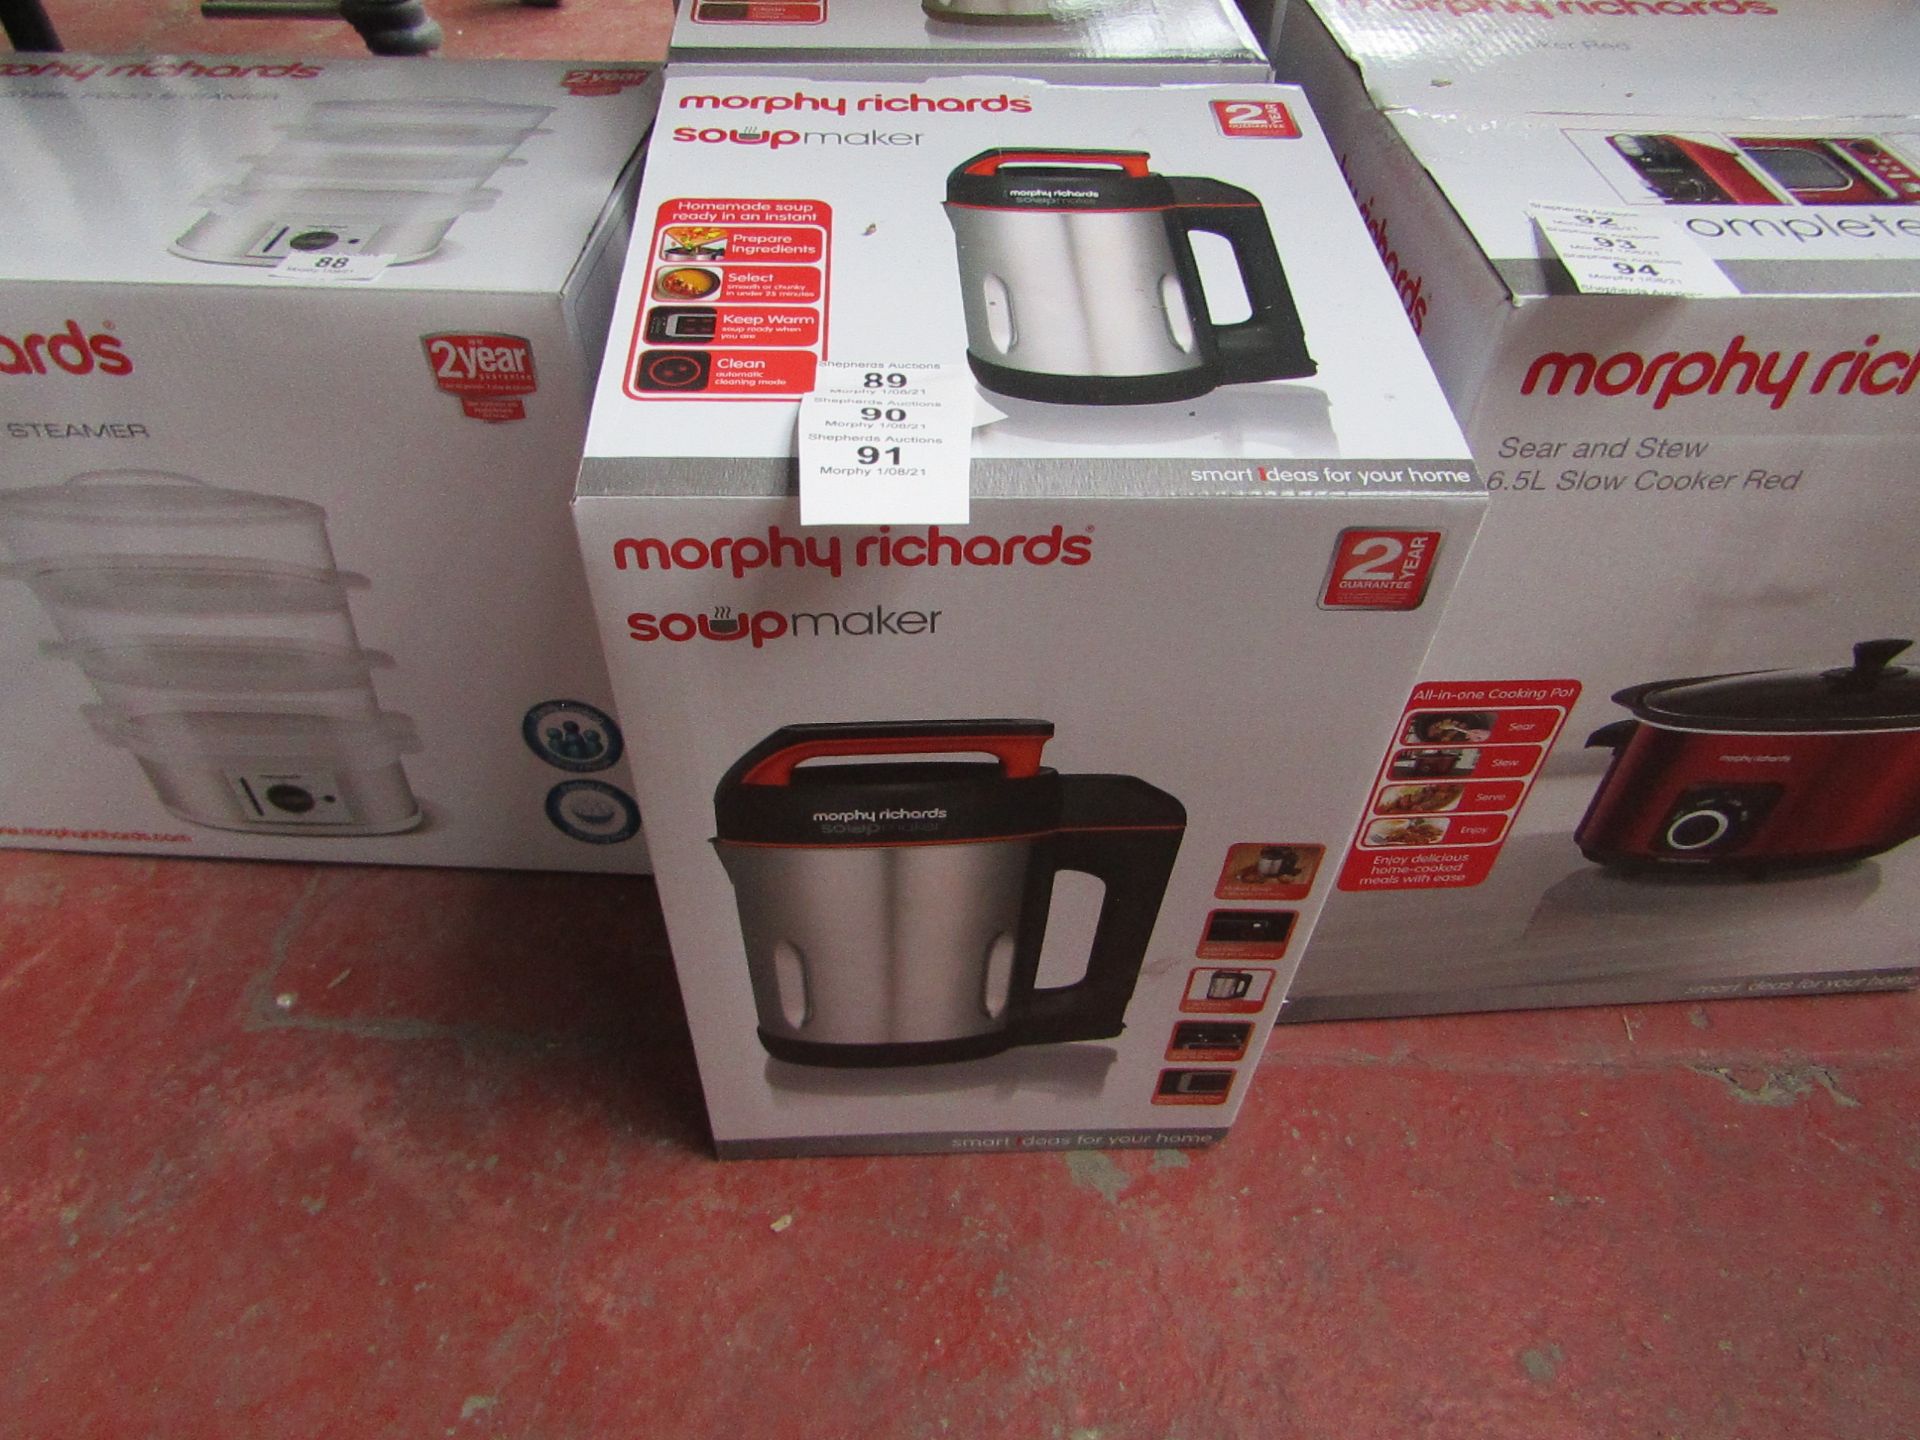 Morphy Richards Soup Maker, brand new and boxed. RRP £59.99